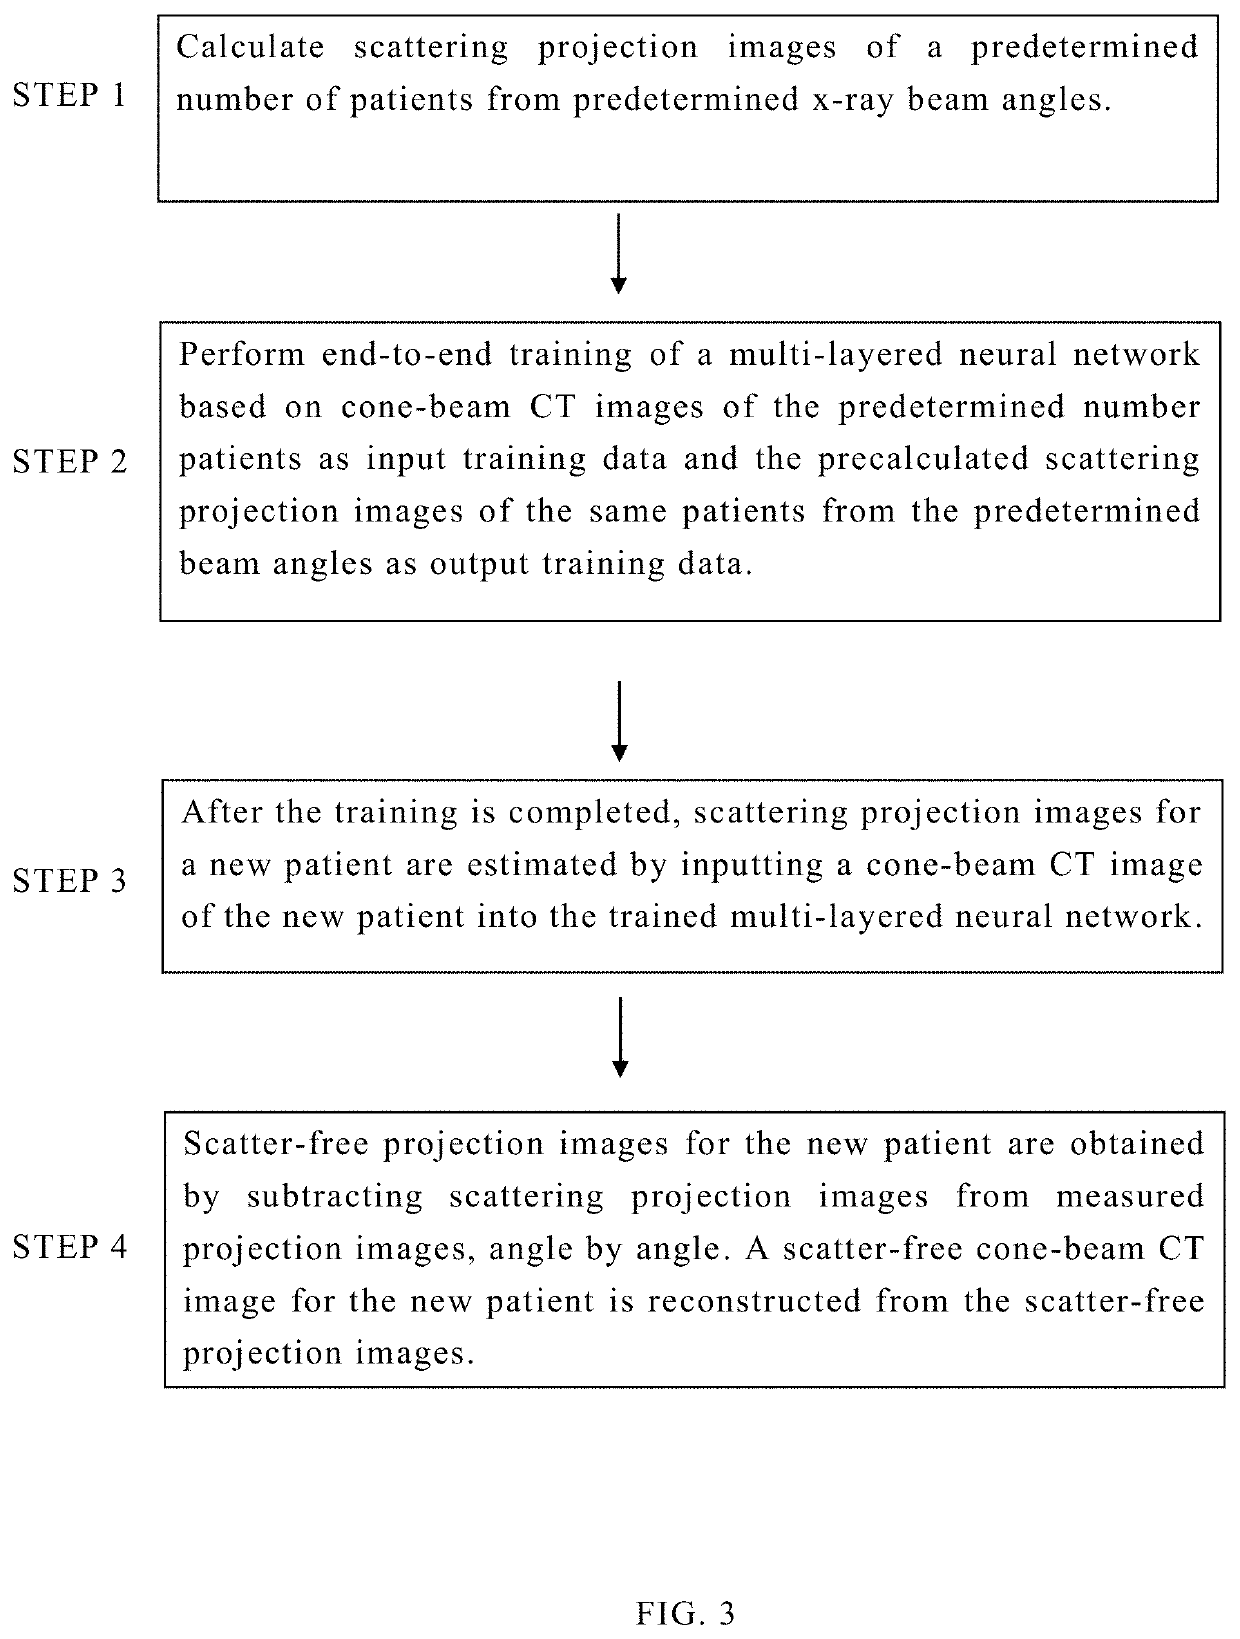 Method for reconstructing x-ray cone-beam CT images